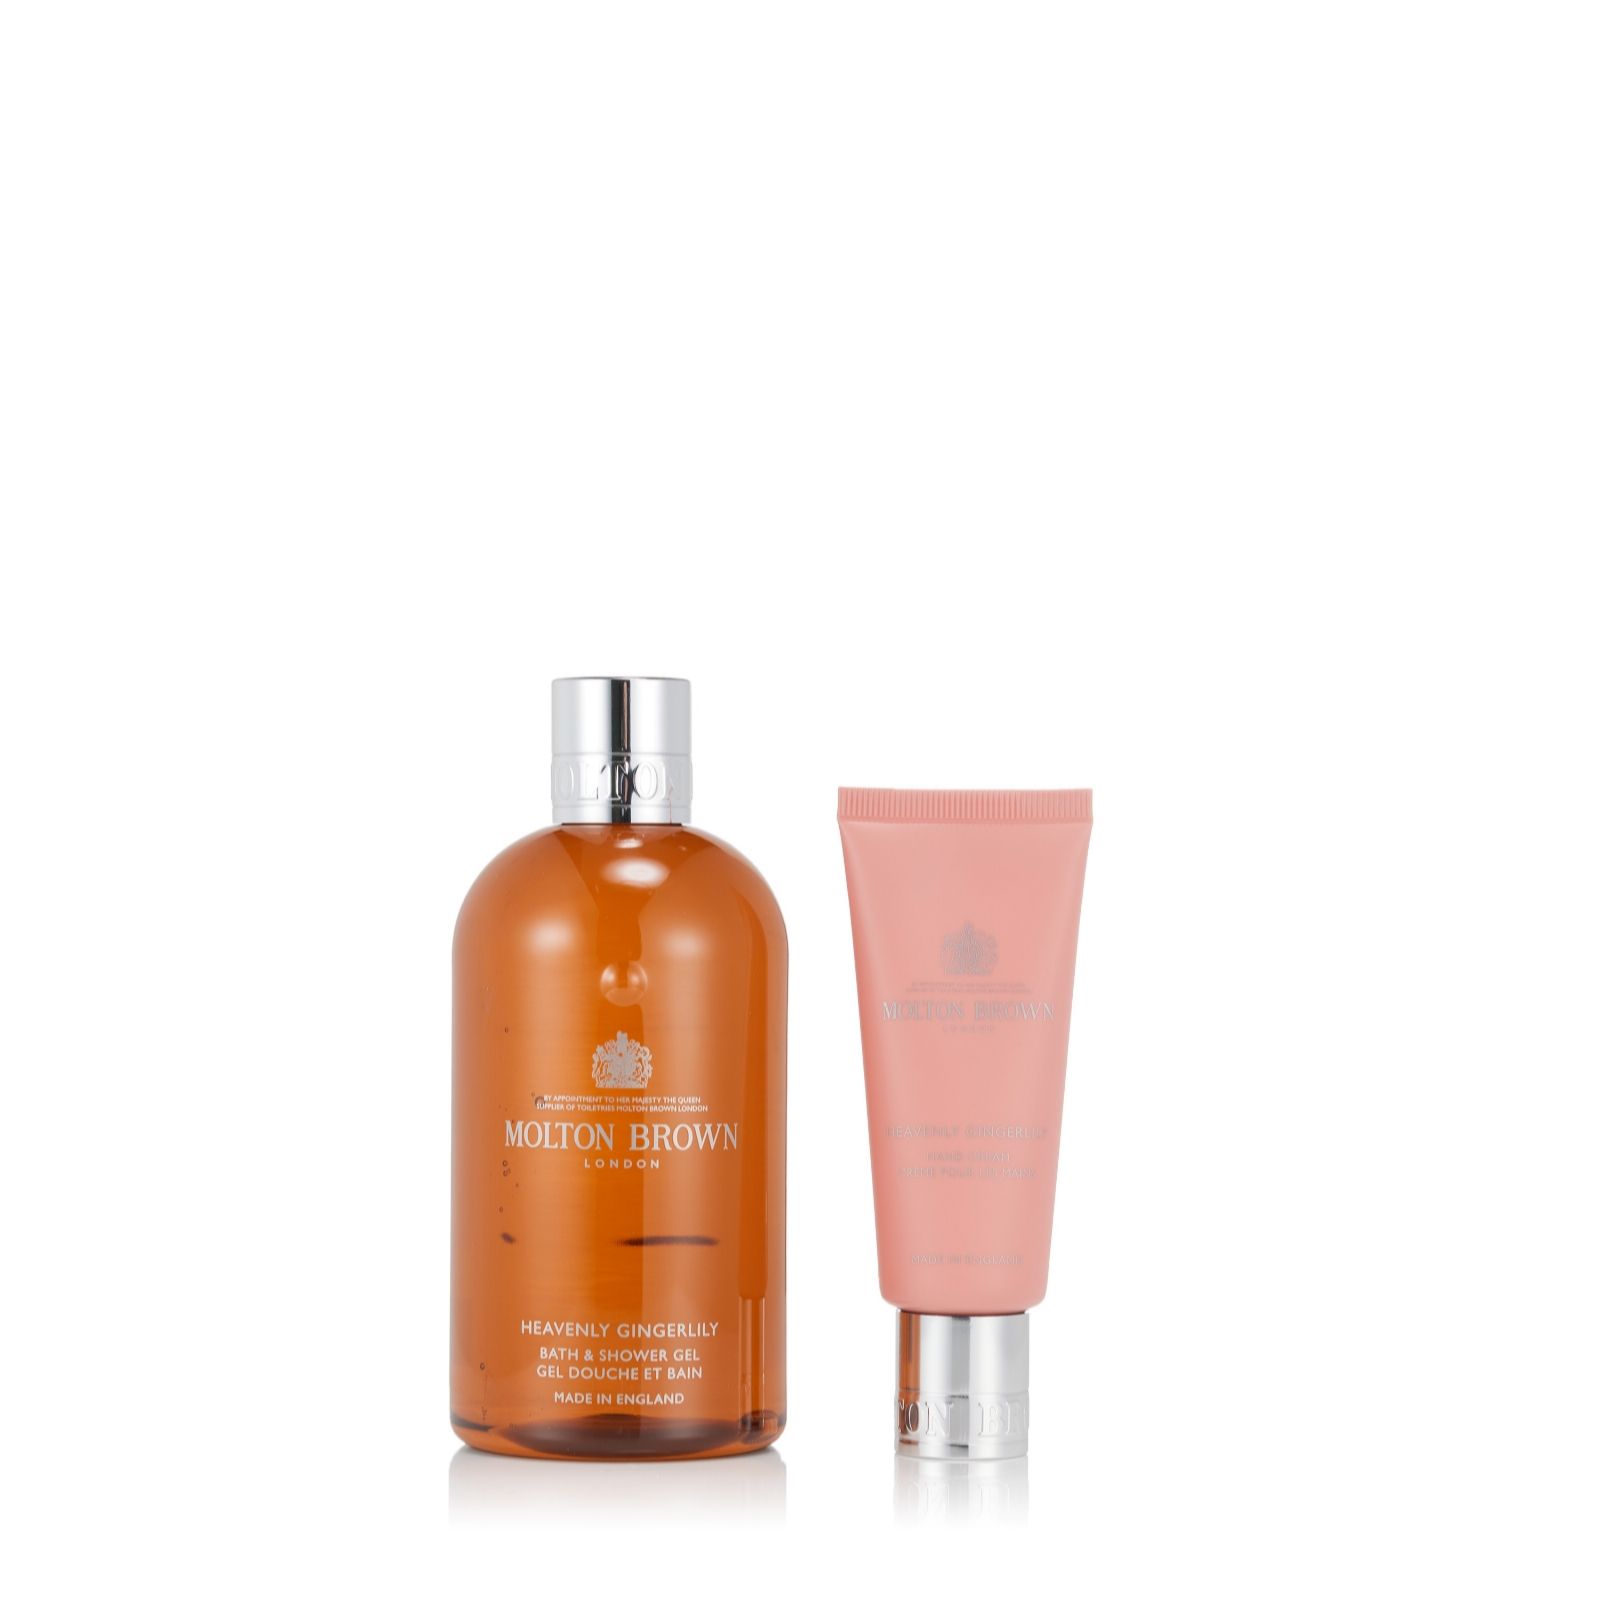 Molton Brown 2 Piece Heavenly Gingerlily Body and Hand Set - QVC UK